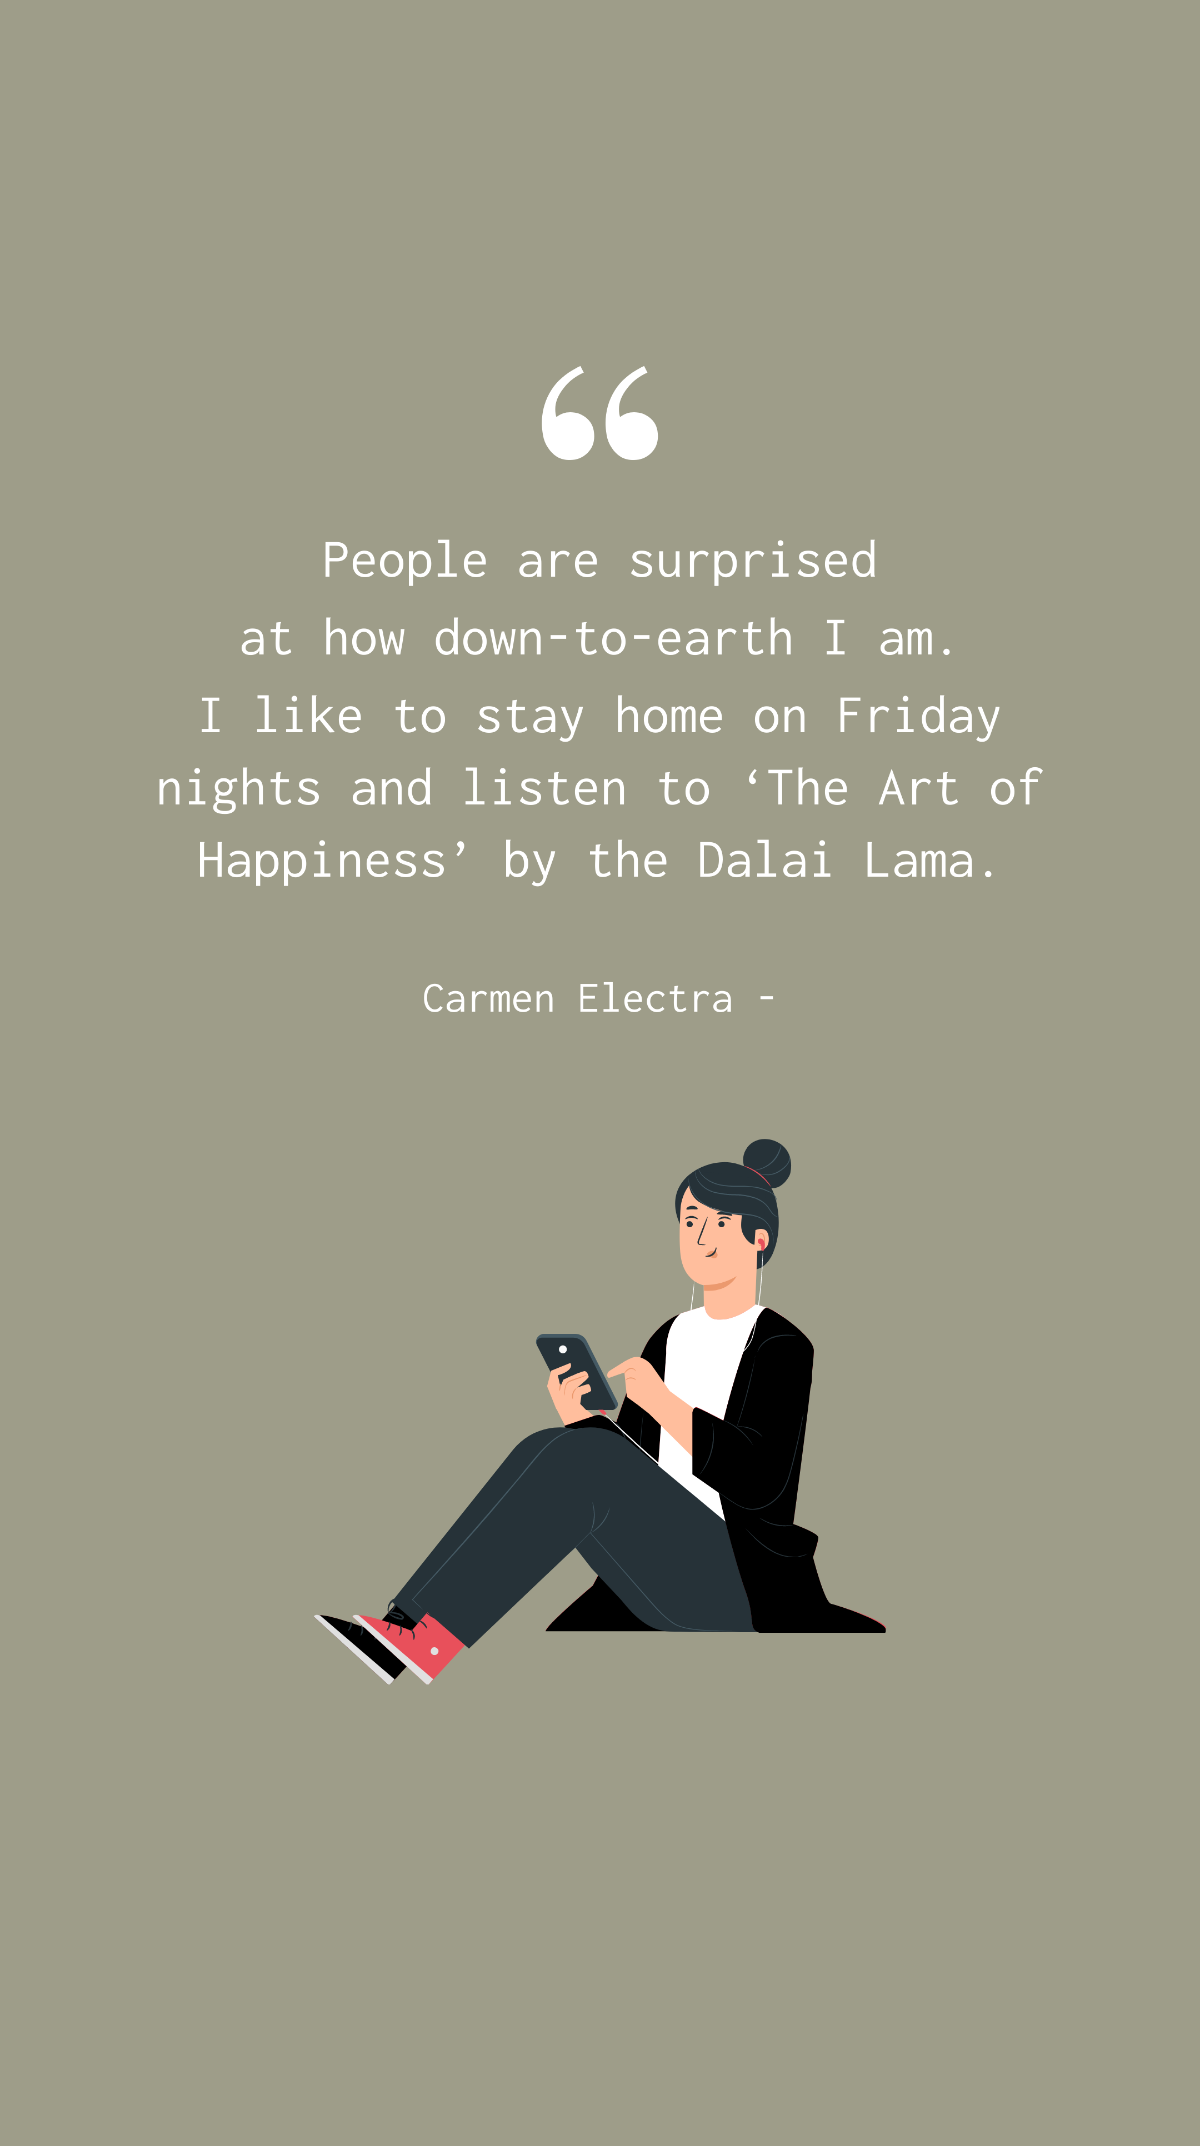 Free Carmen Electra - People are surprised at how down-to-earth I am. I like to stay home on Friday nights and listen to ‘The Art of Happiness’ by the Dalai Lama. Template